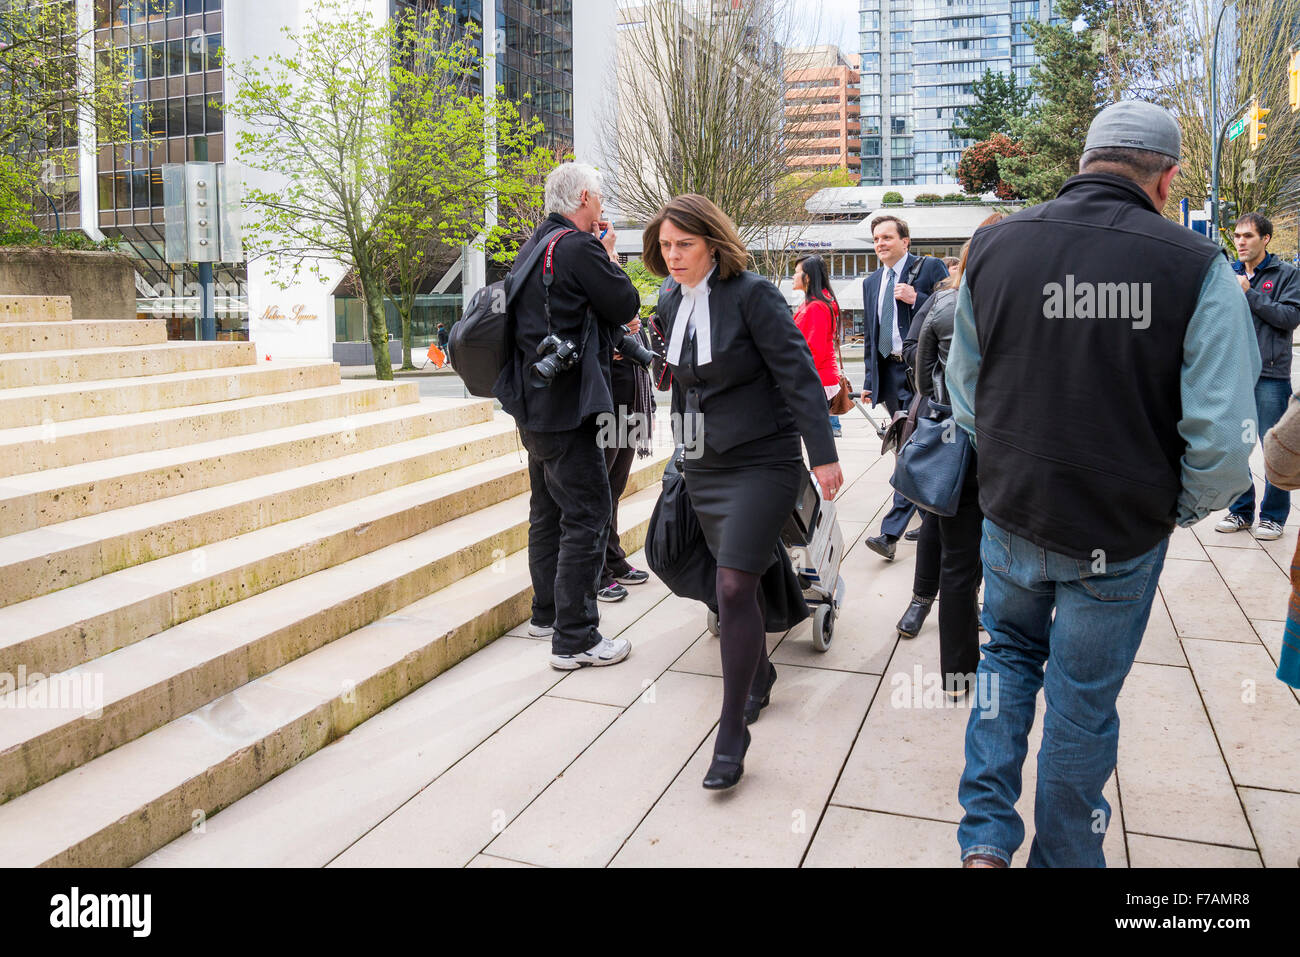 Lawyers pass through crowd outside court house, Vancouver, British Columbia, Canada Stock Photo